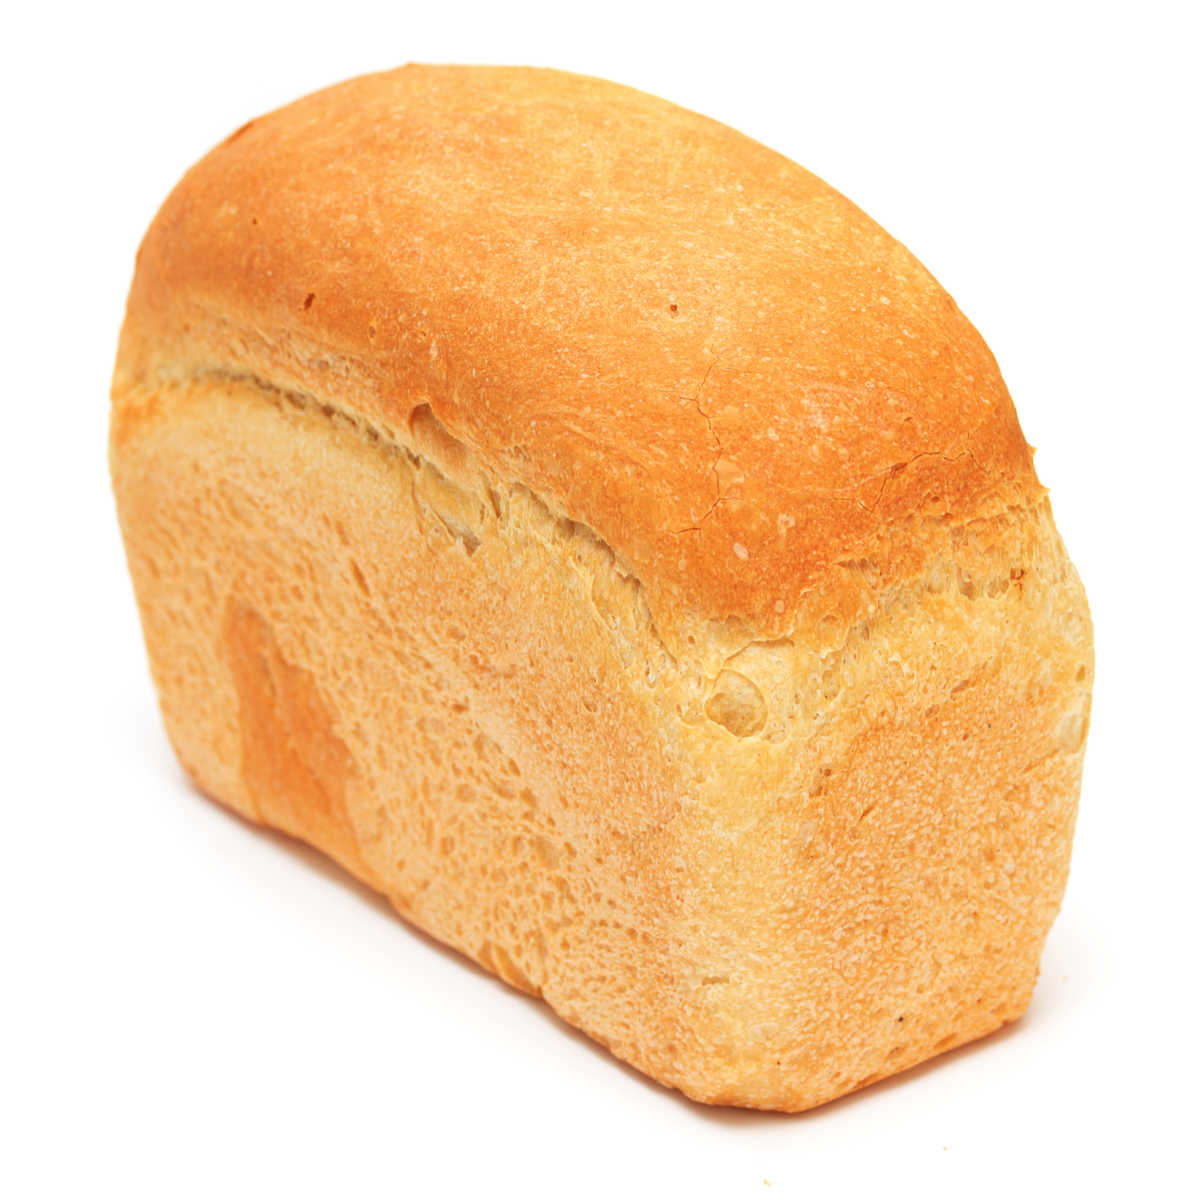 Loaf of white bread against a white background